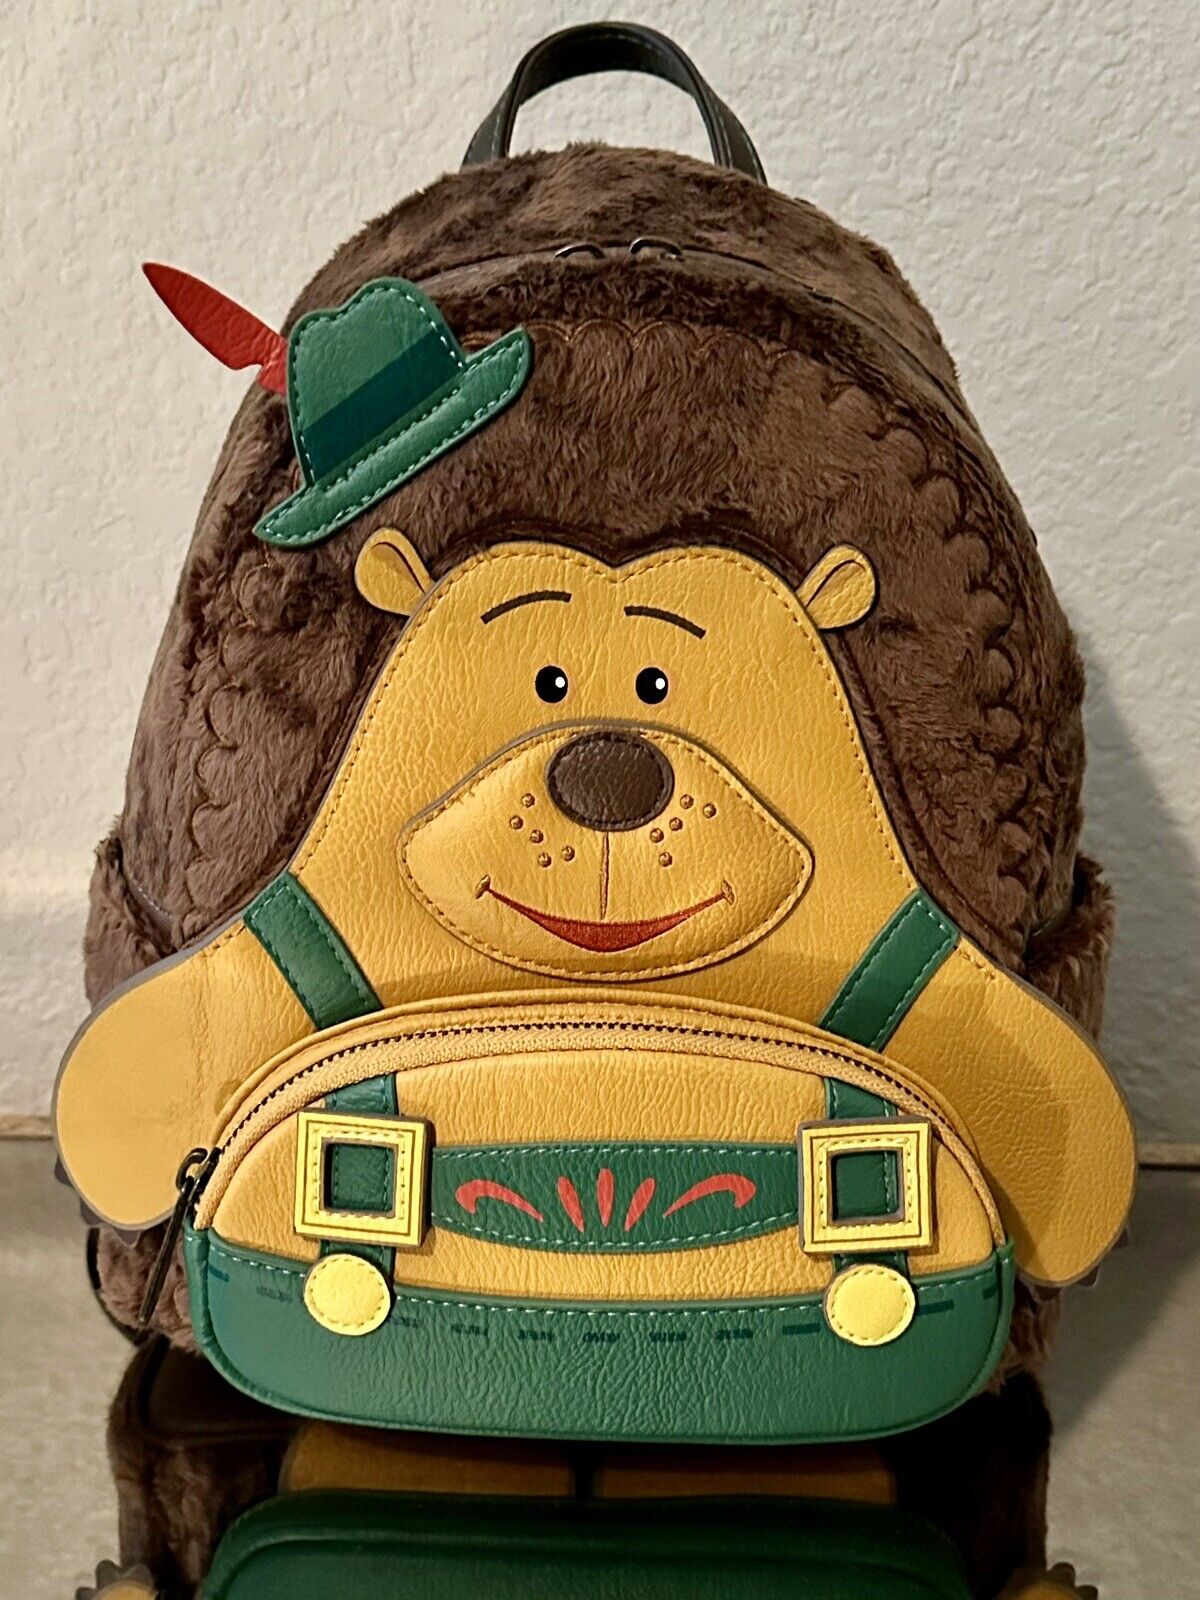 EXCLUSIVE DROP Loungefly Toy Story Mr. Pricklepants Backpack NEW w TAGS